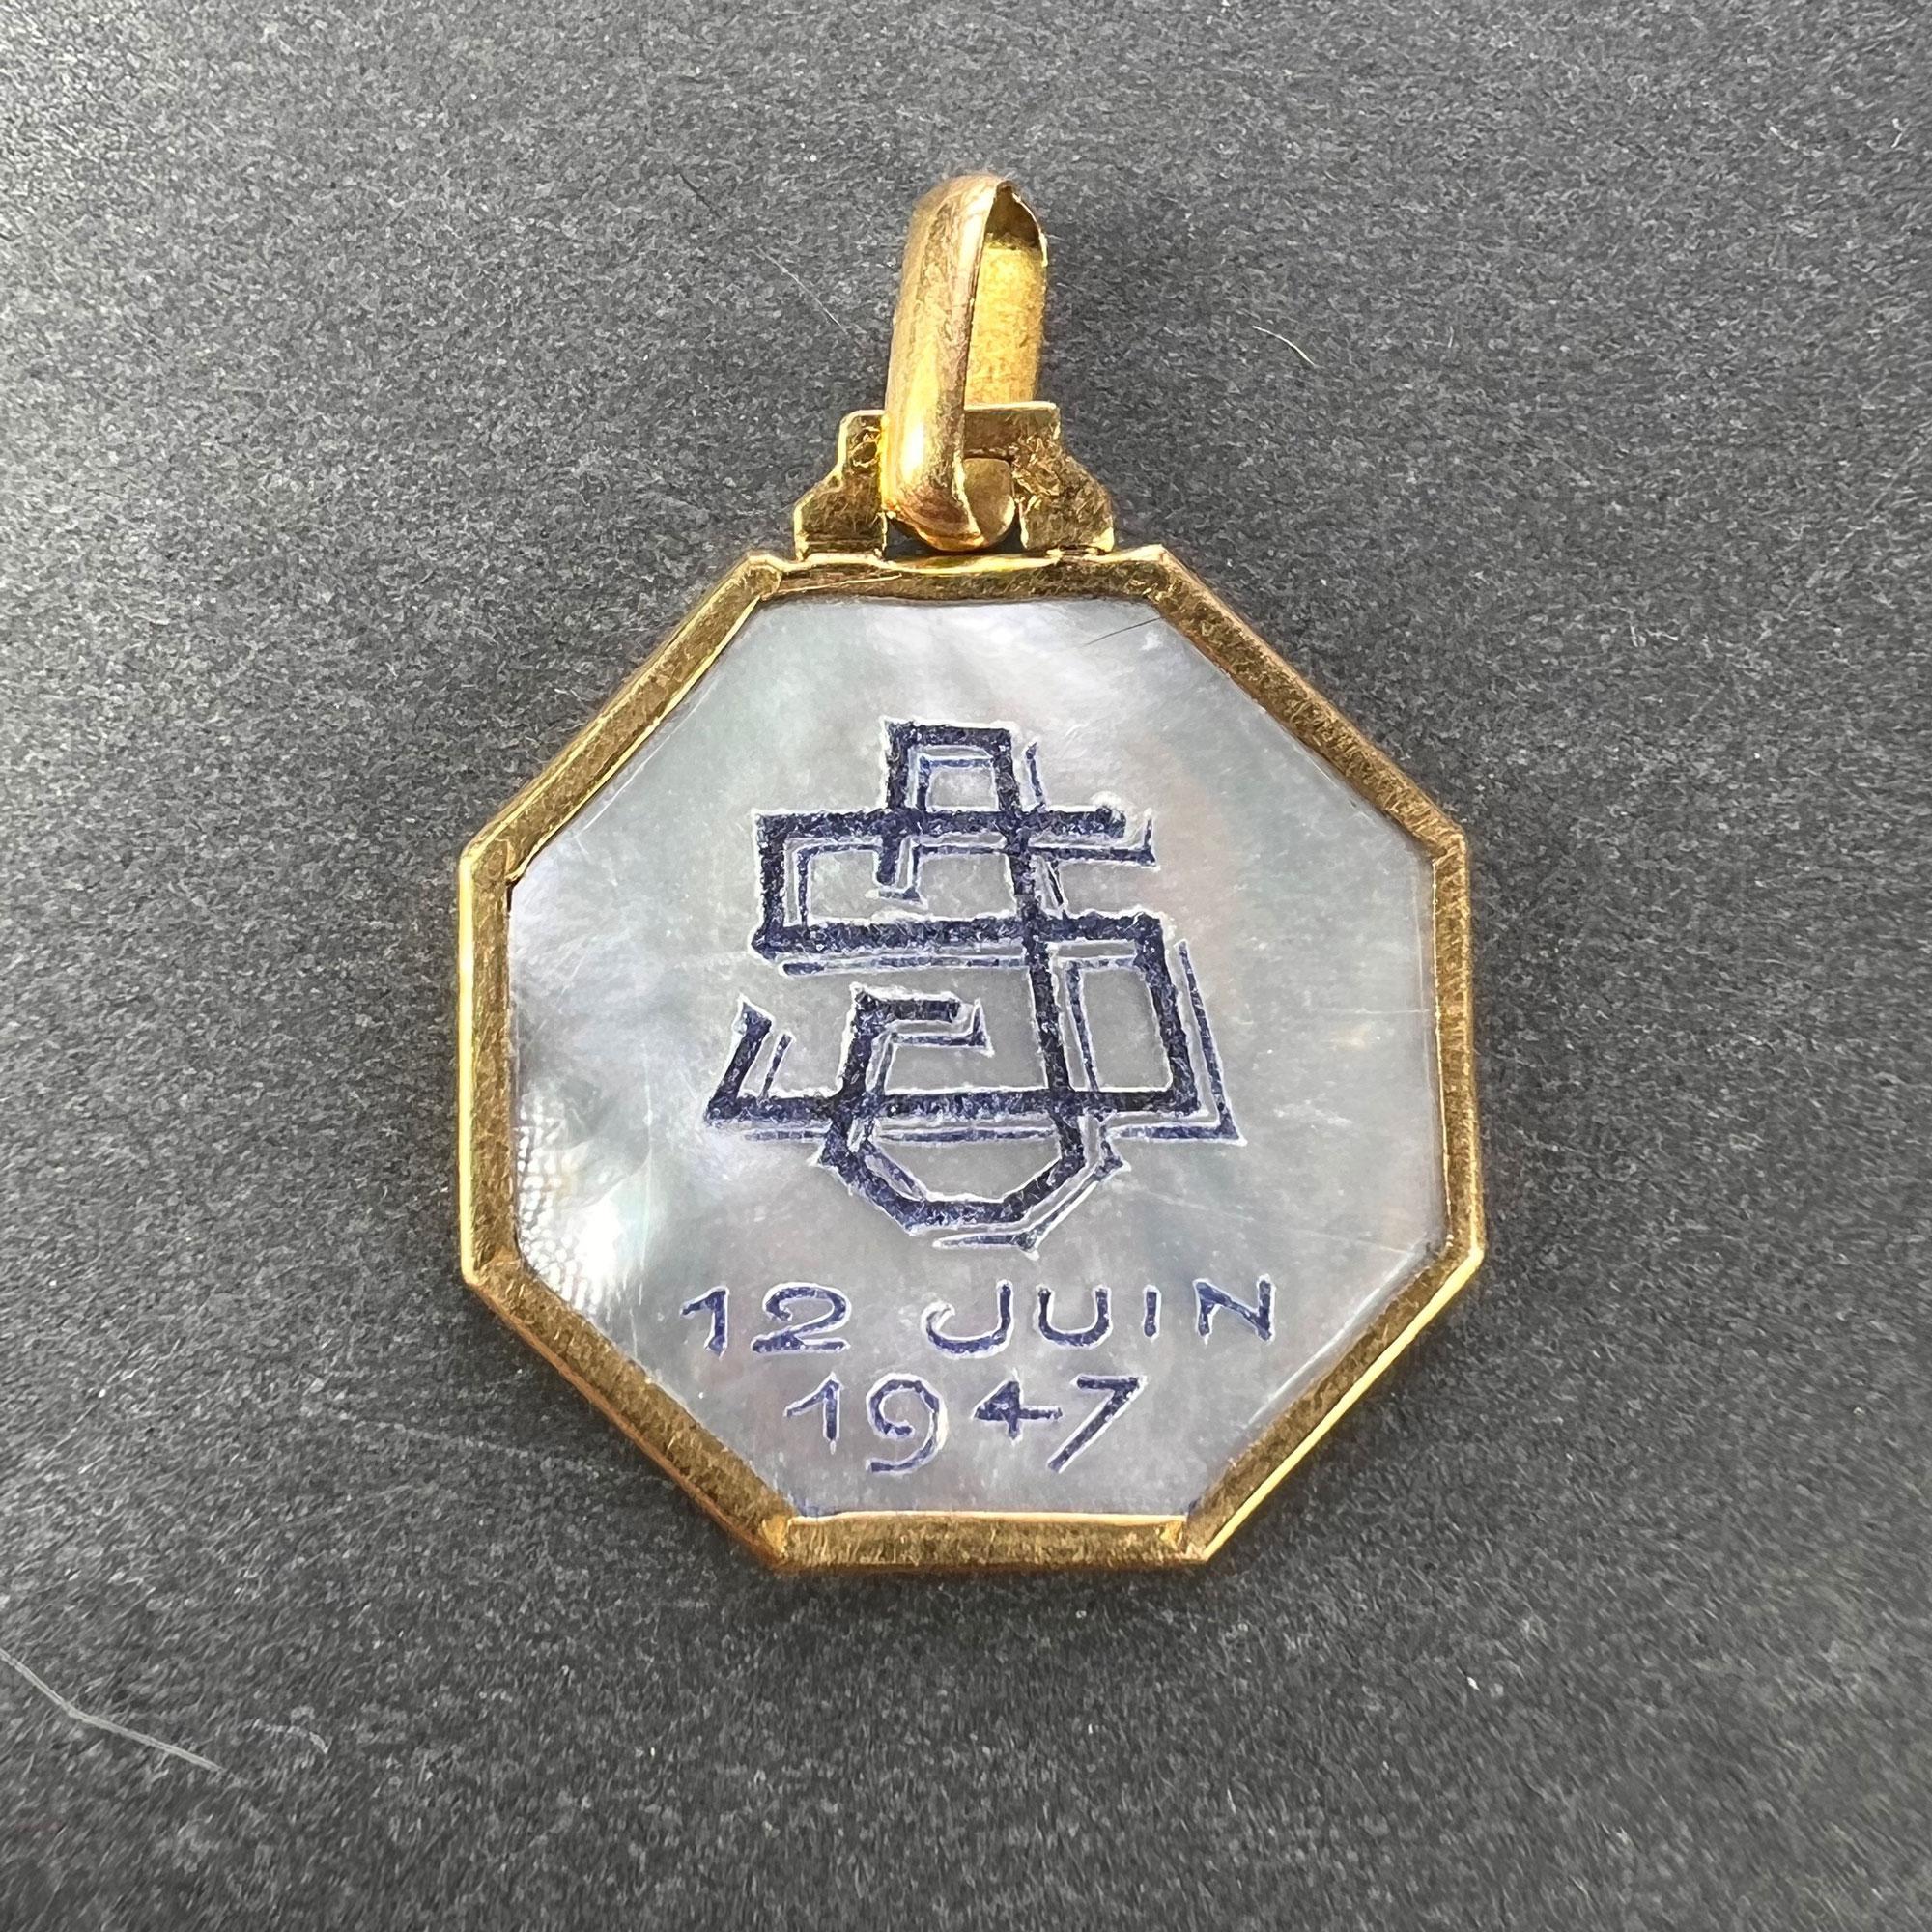 An 18 karat (18K) yellow gold charm pendant set with mother of pearl depicting the Virgin Mary. Engraved to the reverse with a monogram for SJ and the date 12 Juin 1947. Stamped with the eagle mark for 18 karat gold and French manufacture with